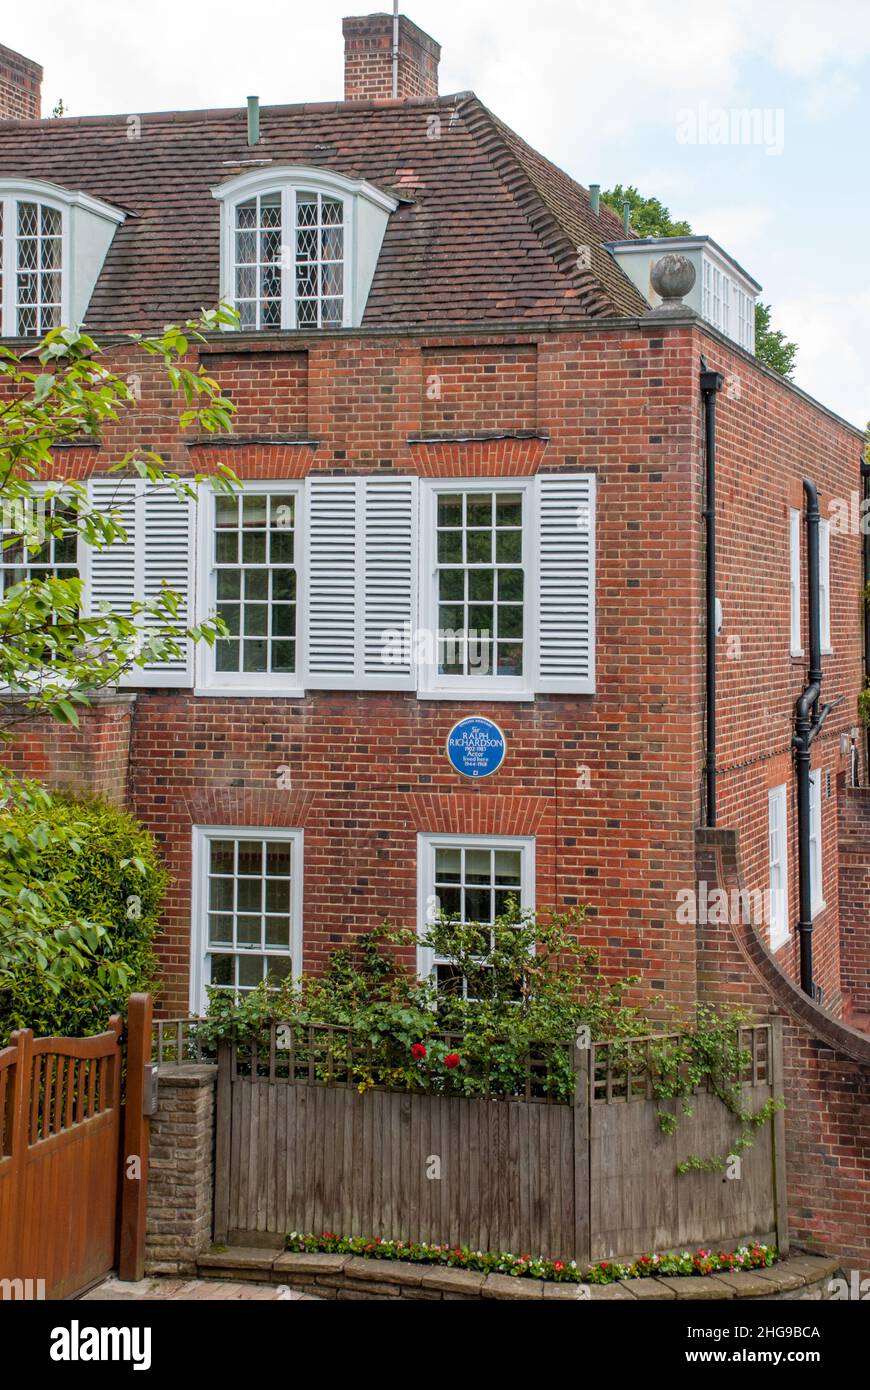 UK, England, London. Actor Sir Ralph Richardson lived here in Hampstead Garden Suburb. Blue Plaque shows dates 1944 - 1968. Stock Photo